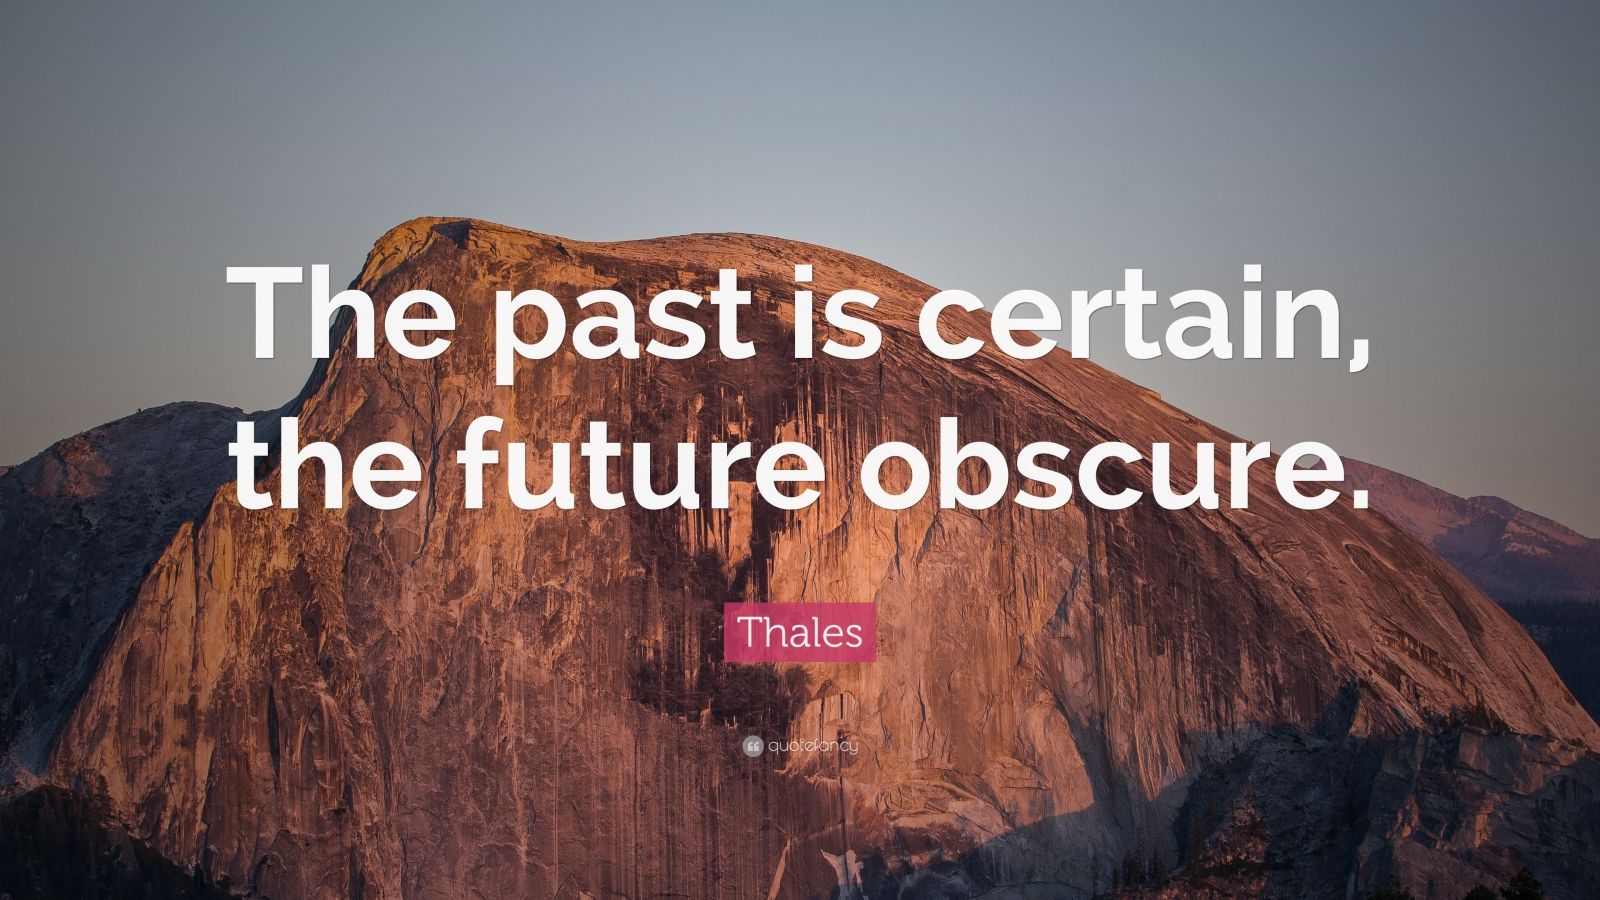 Thales Quotes (20 wallpapers) - Quotefancy